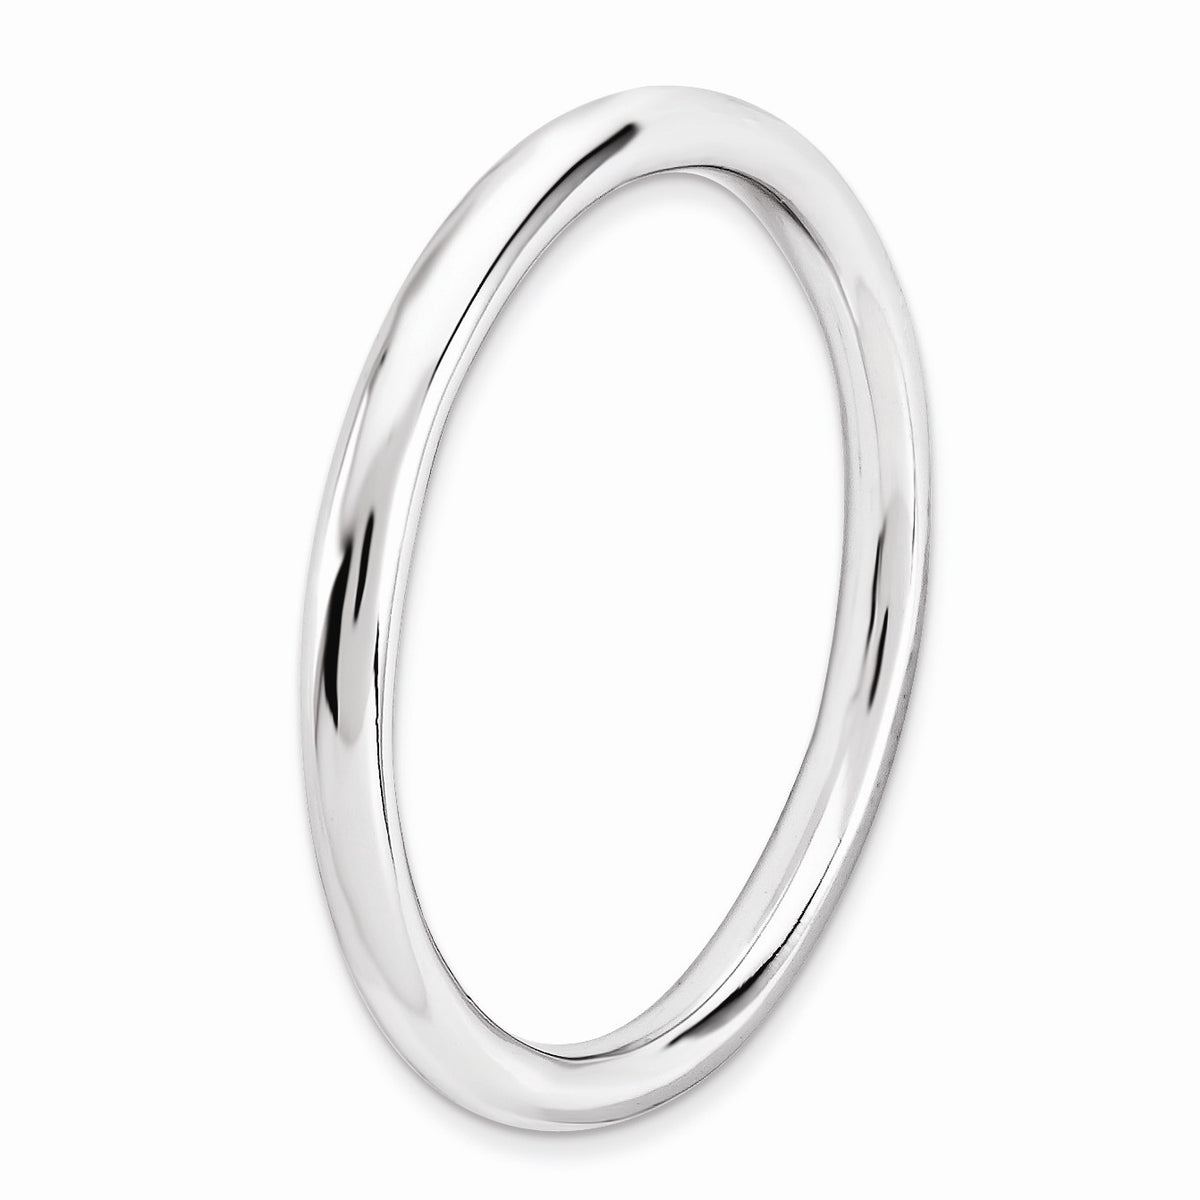 Alternate view of the 2.25mm Rhodium Plated Sterling Silver Stackable Polished Band by The Black Bow Jewelry Co.